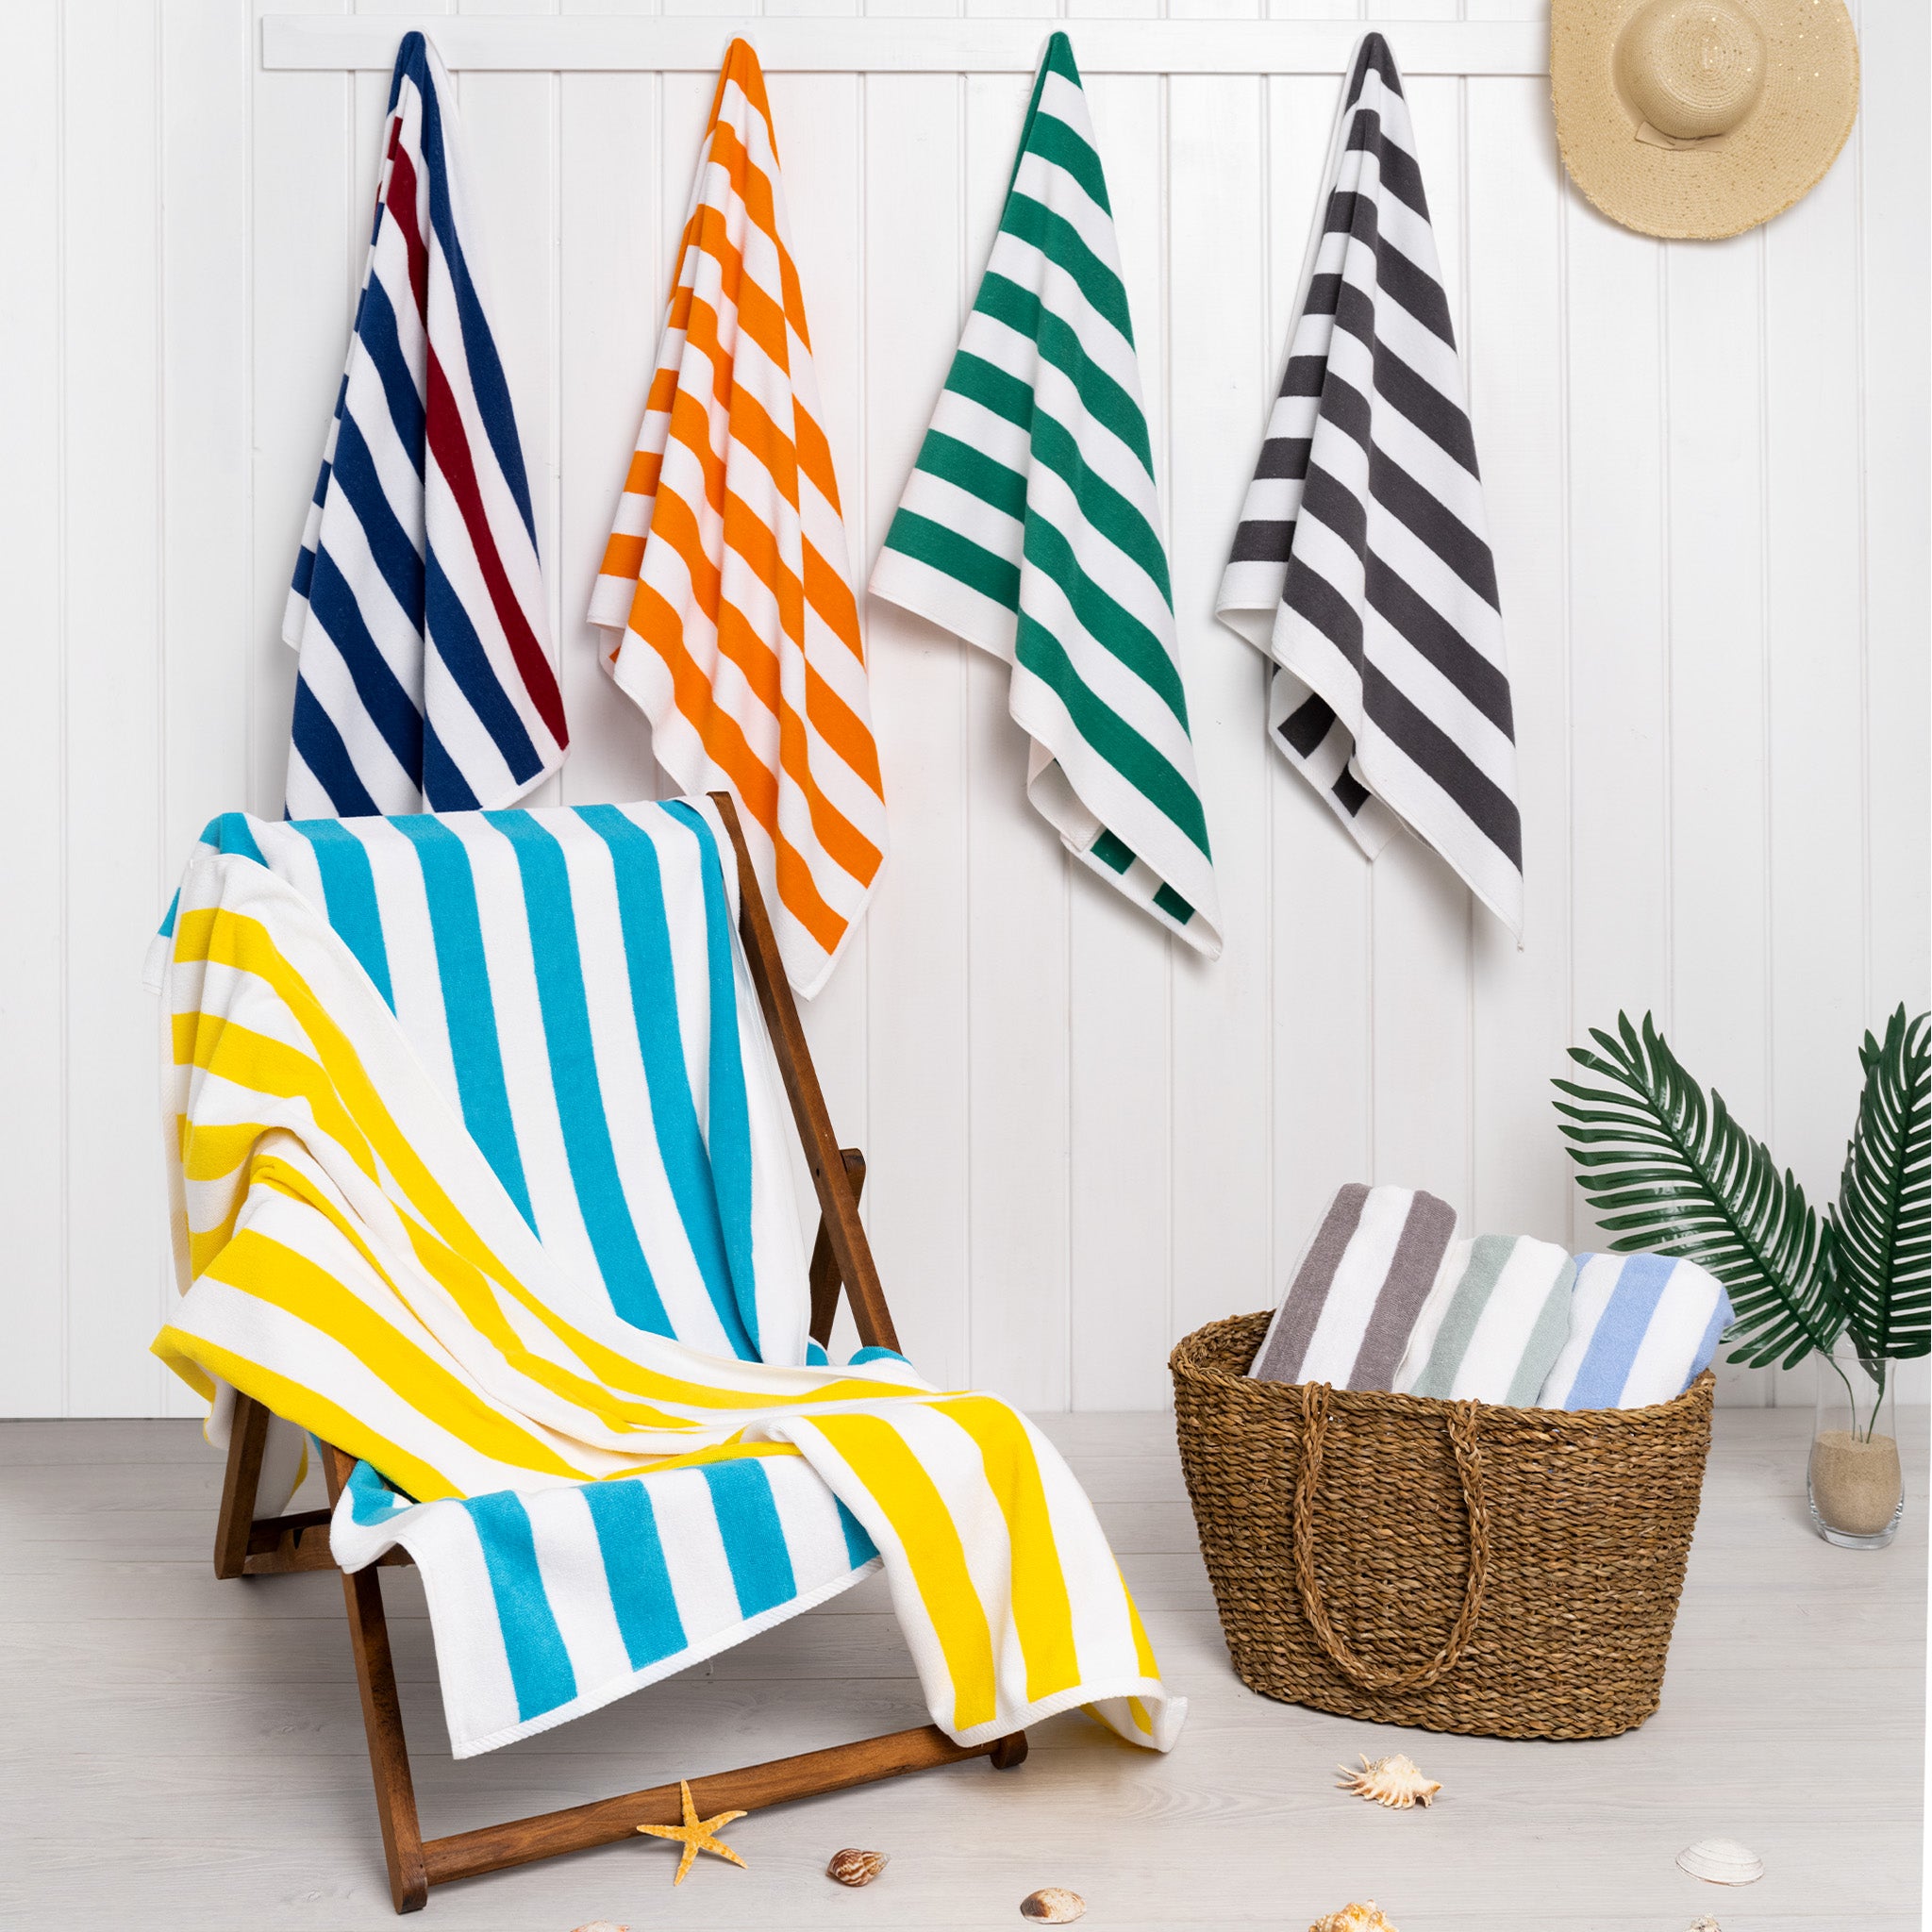 American Soft Linen 100% Cotton 4 Pack Beach Towels Cabana Striped Pool Towels -sage-green-8